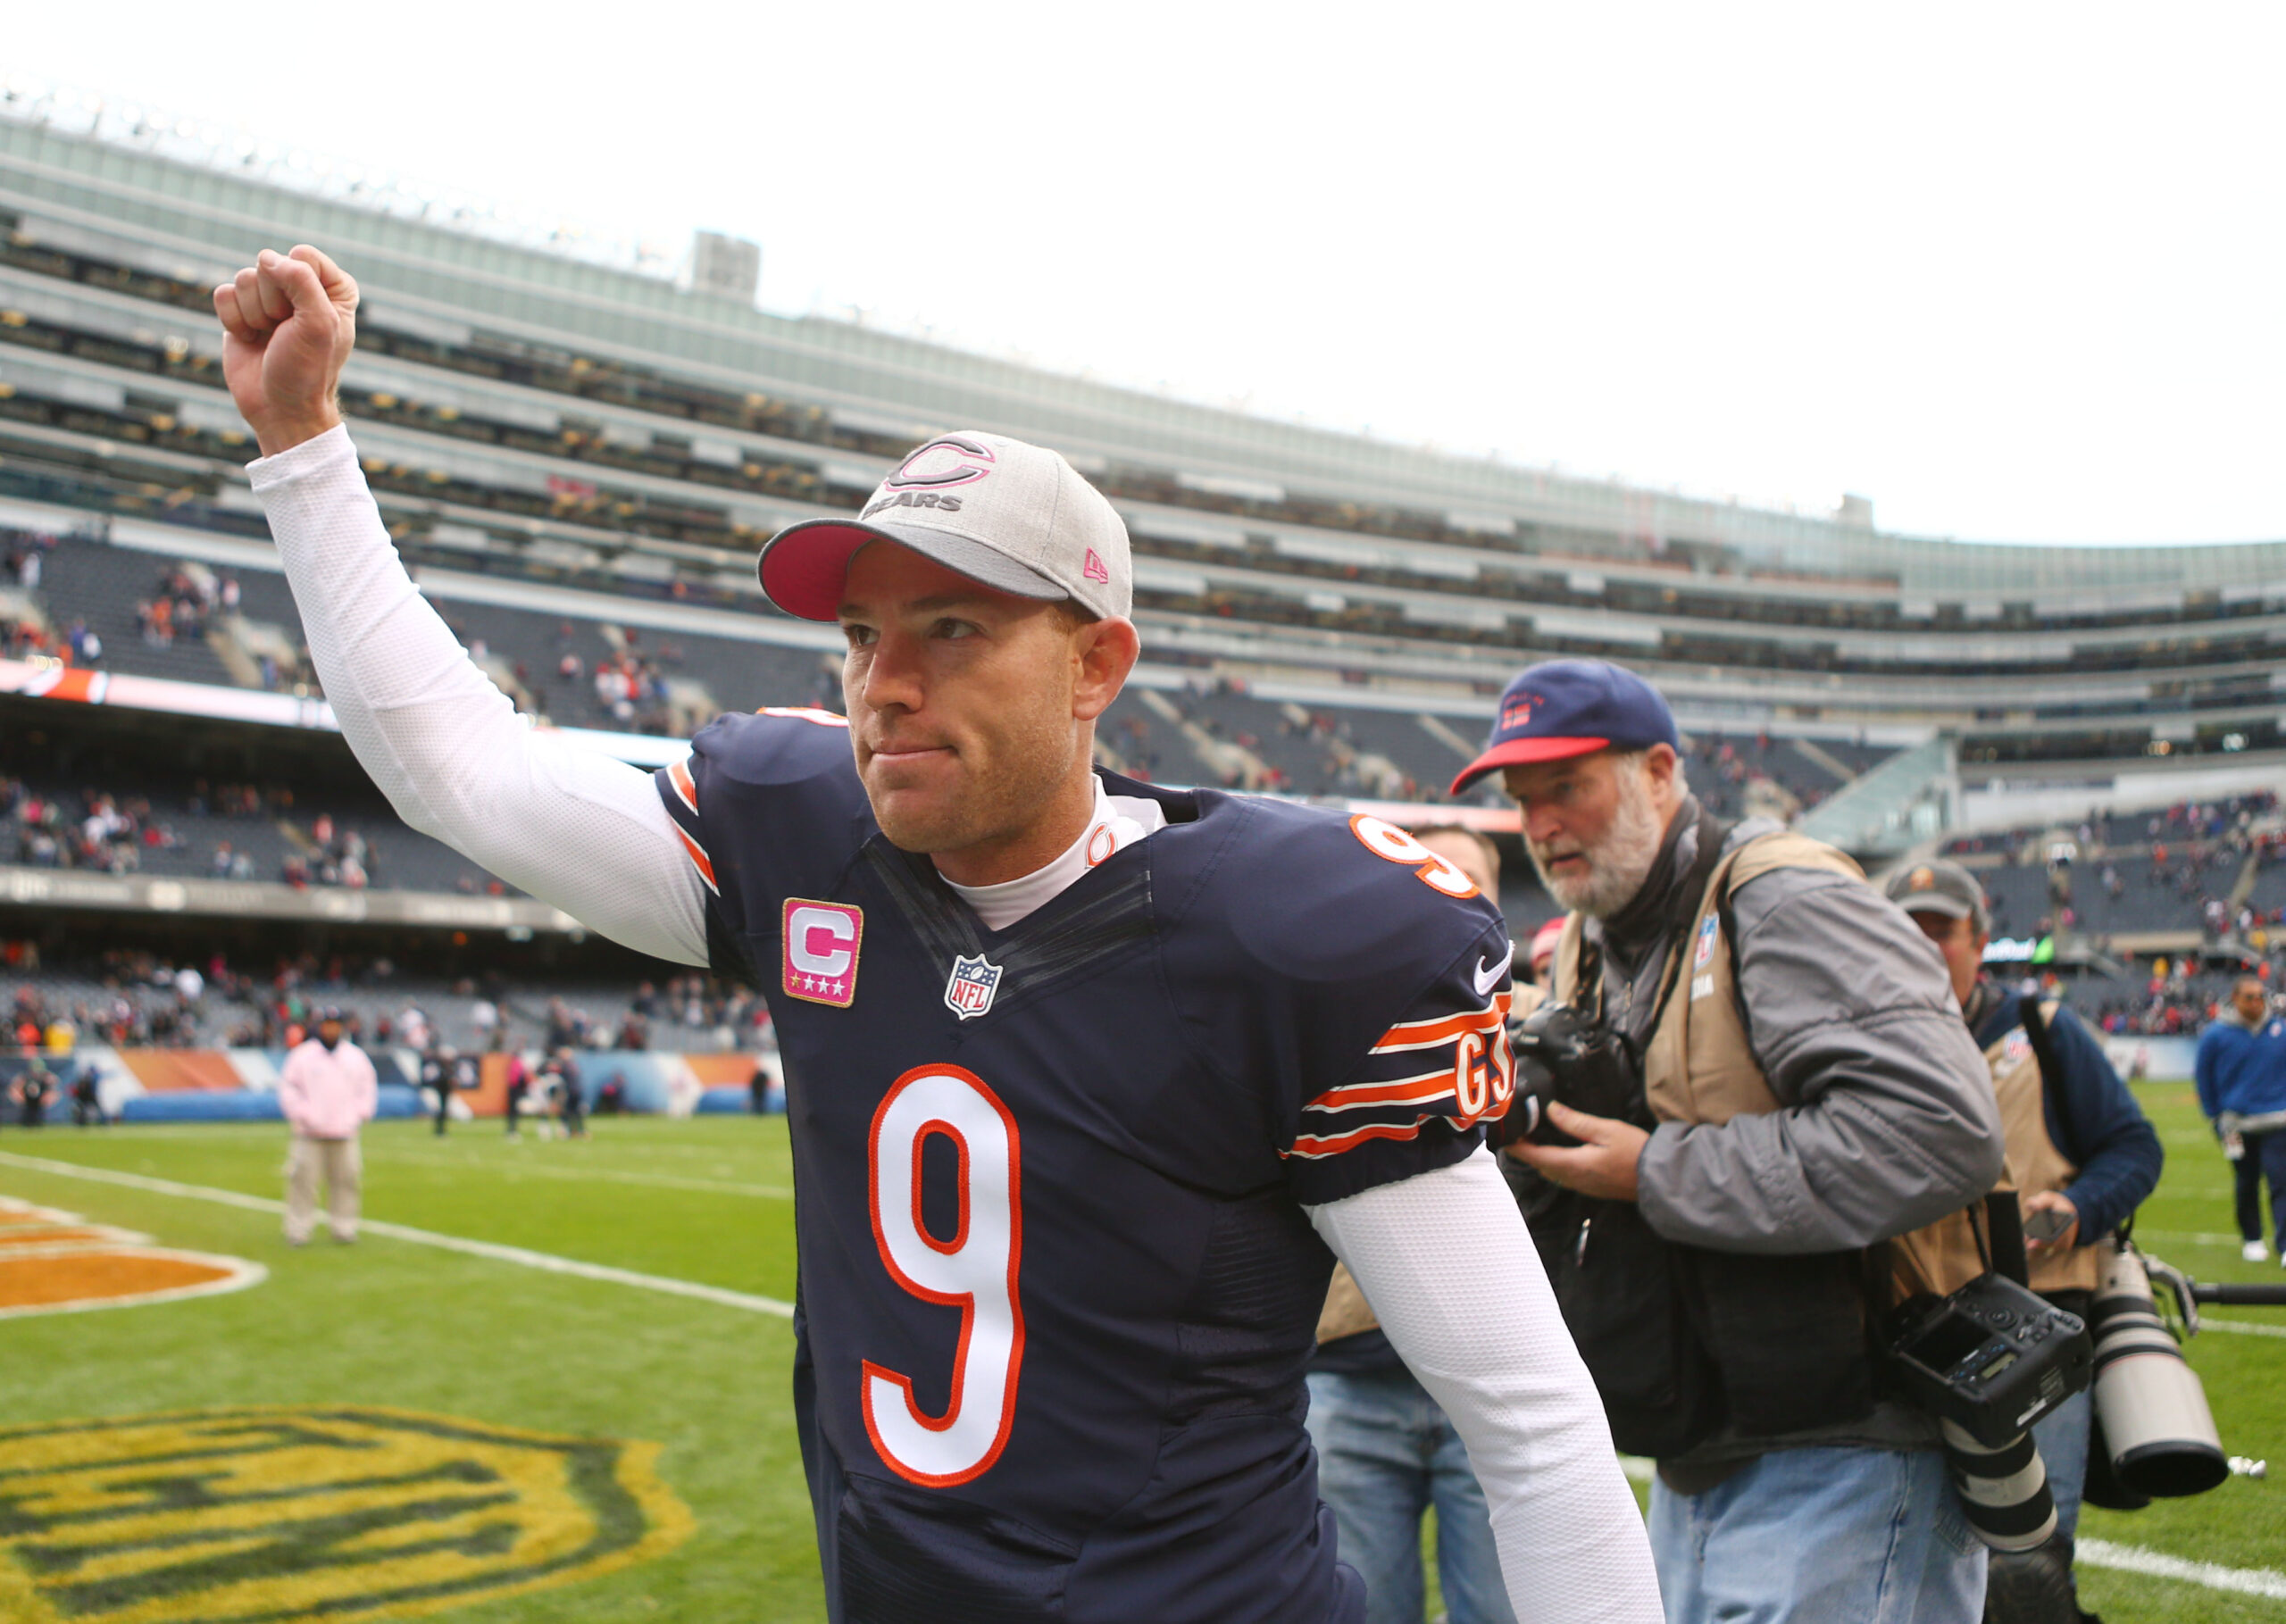 Robbie Gould says he would ‘absolutely’ come back to play for the Bears again